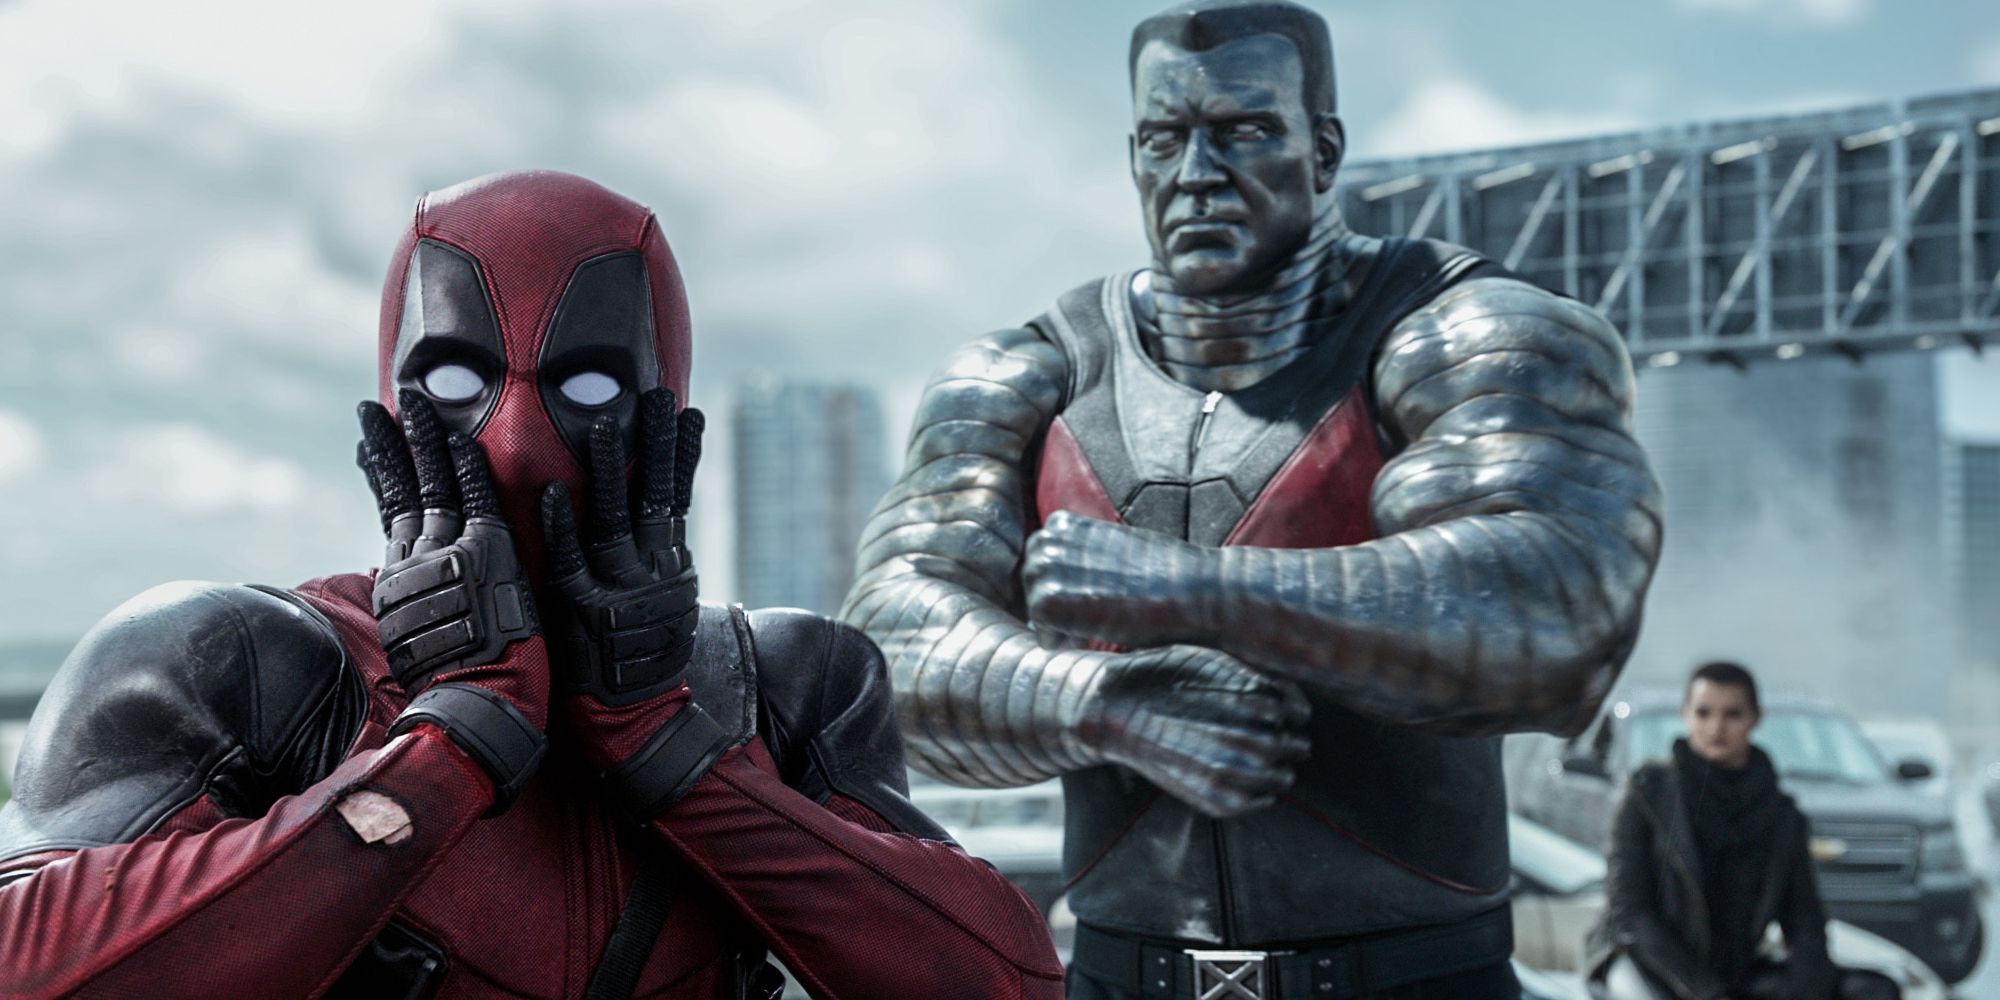 Deadpool teams up with Colossus and Negasonic to fight Ajax and save his girlfriend.